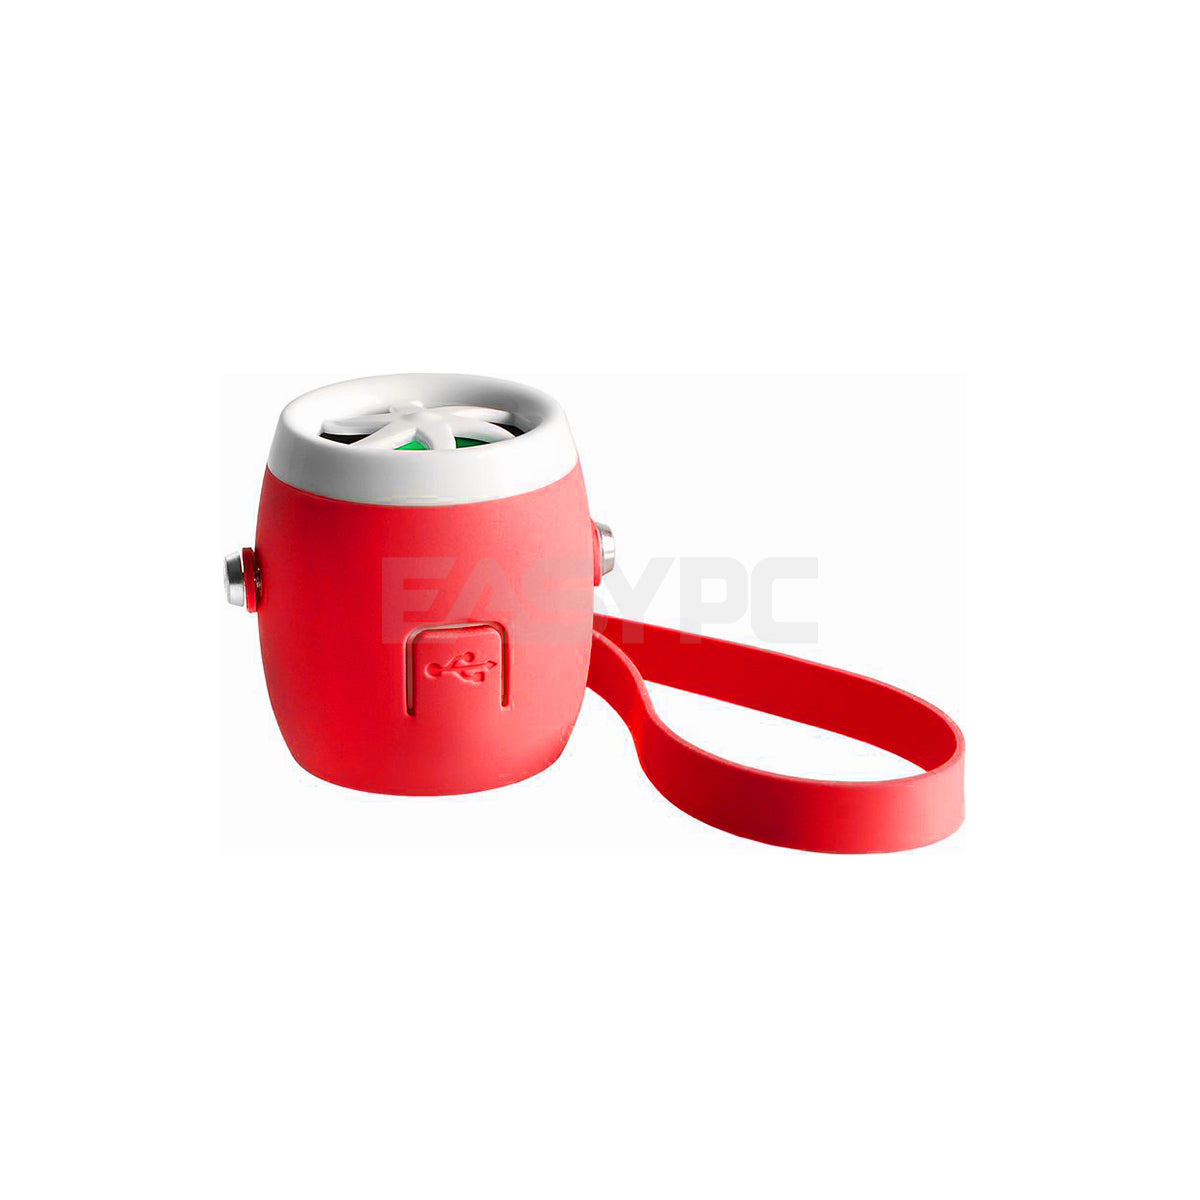 A4tech BTS 06 Mini water resistant, Built in Lithium Battery wireless Bluetooth Speaker Red